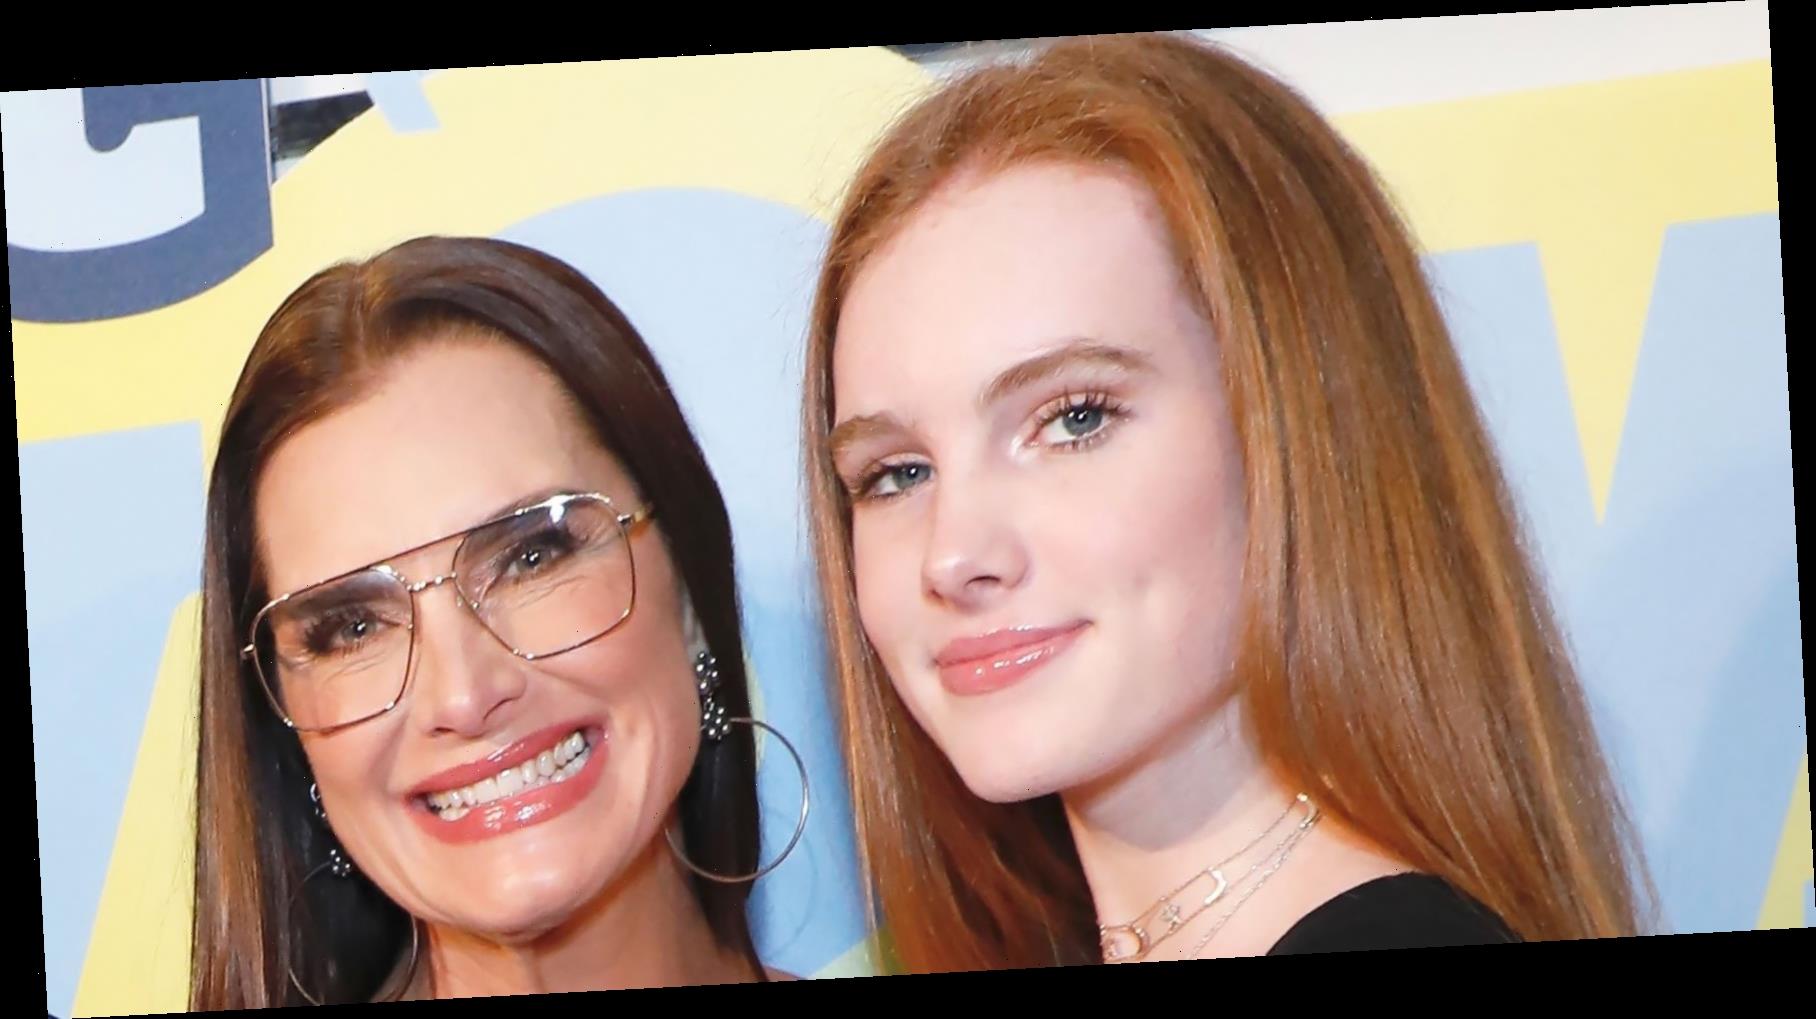 Brooke Shields' Daughter Hits Her in Face for TikTok: 'A-hole Move